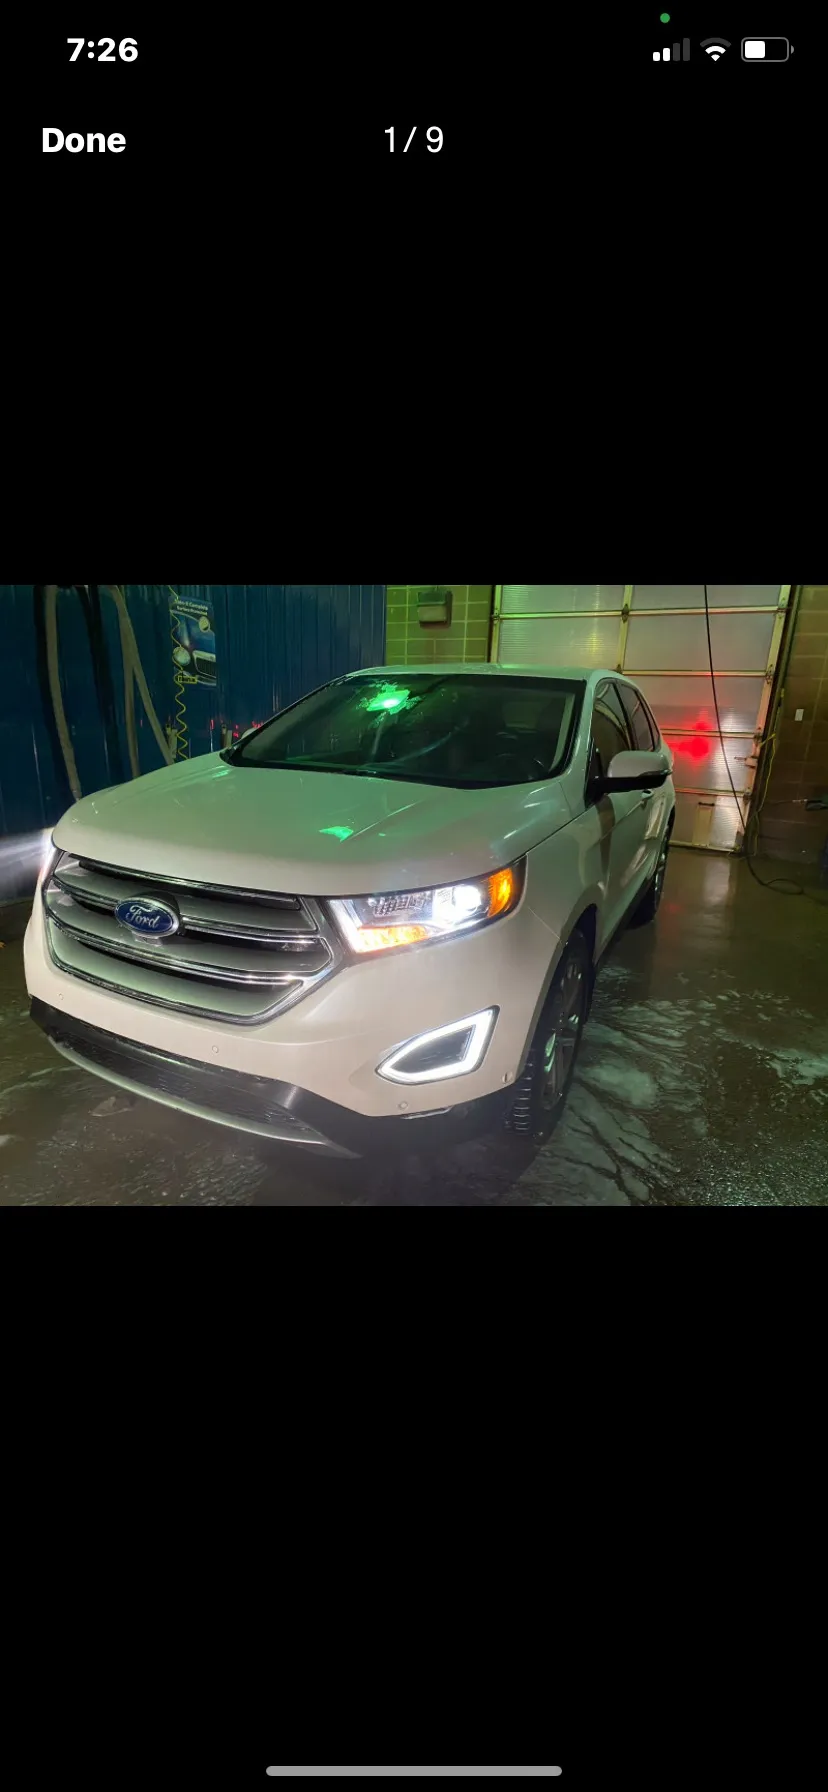 2017 Ford Edge Titanium in Pearl White with Dark Brown leather